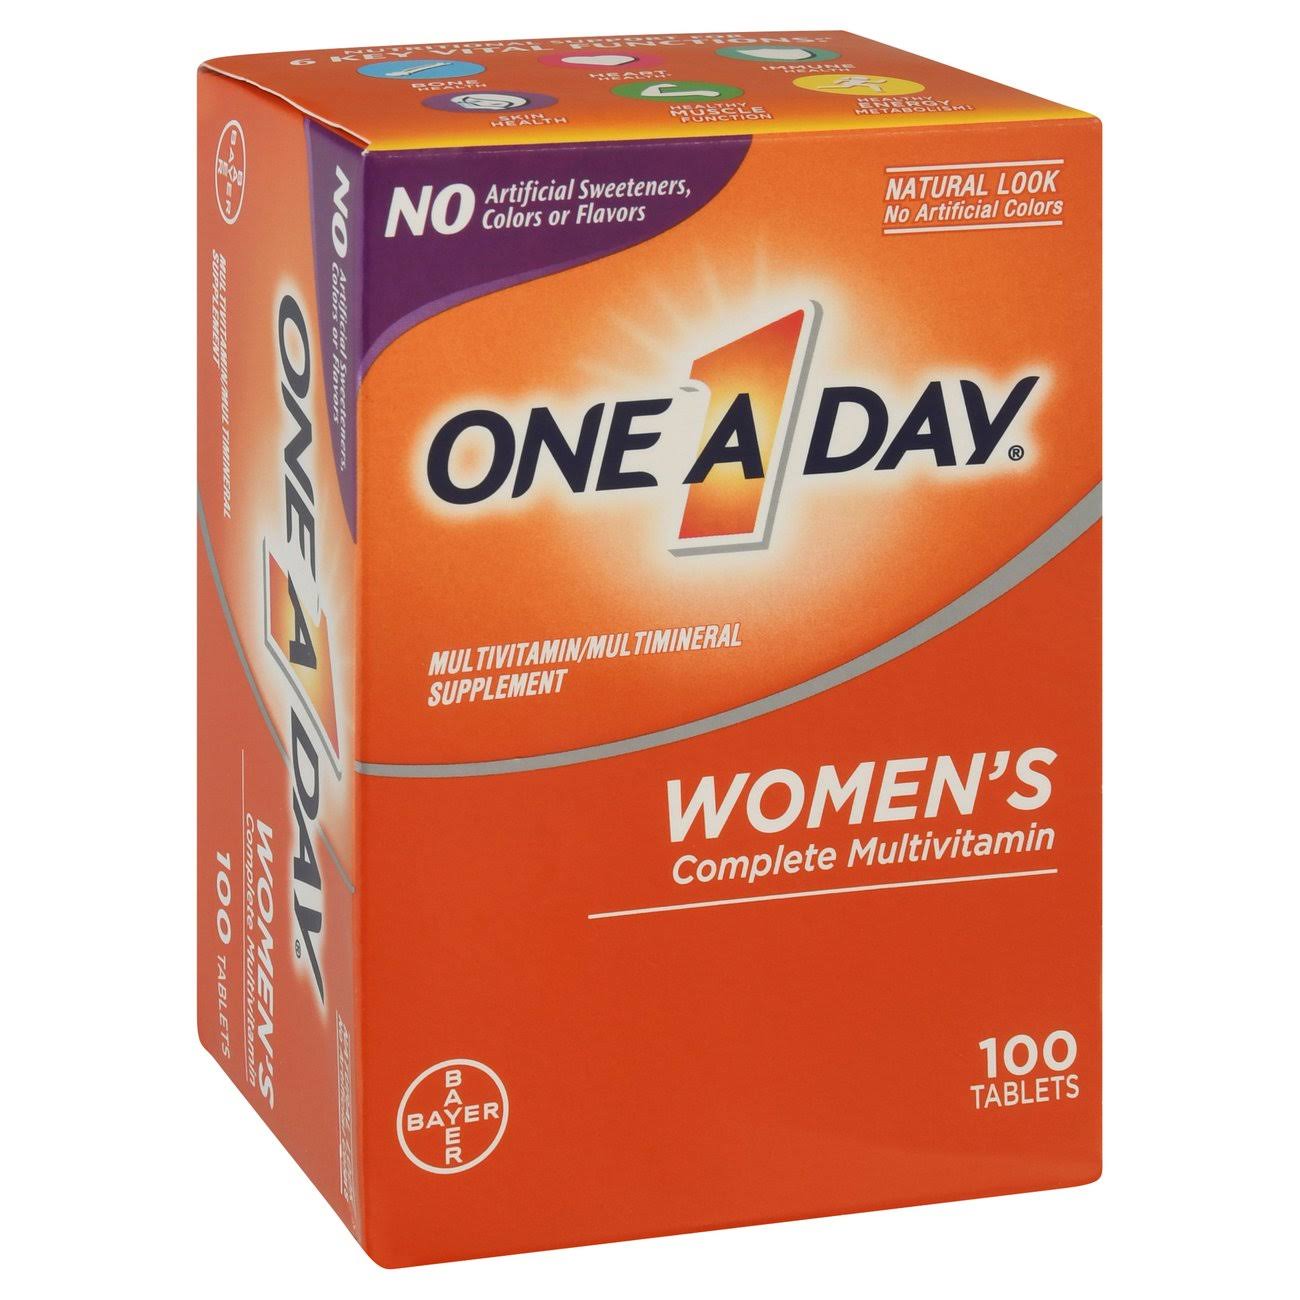 One A Day Women's Complete Multivitamin Supplement 100 ct